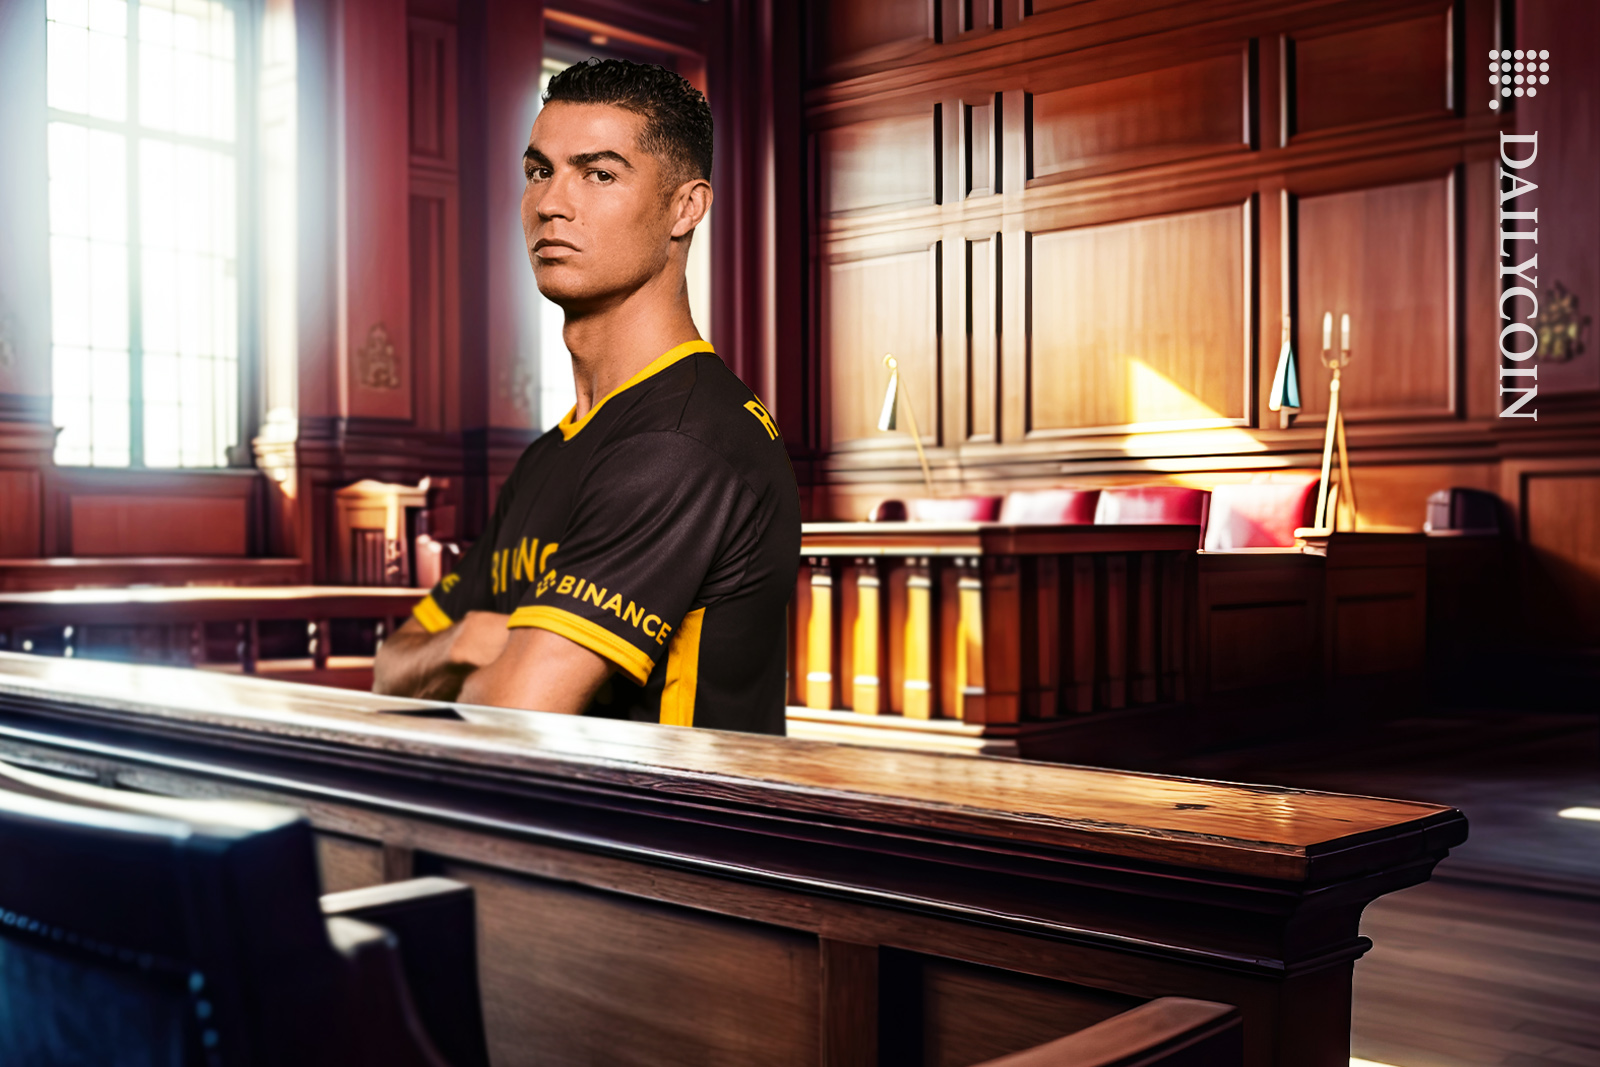 Cristiano Ronaldo not happy to be facing court for Binance.